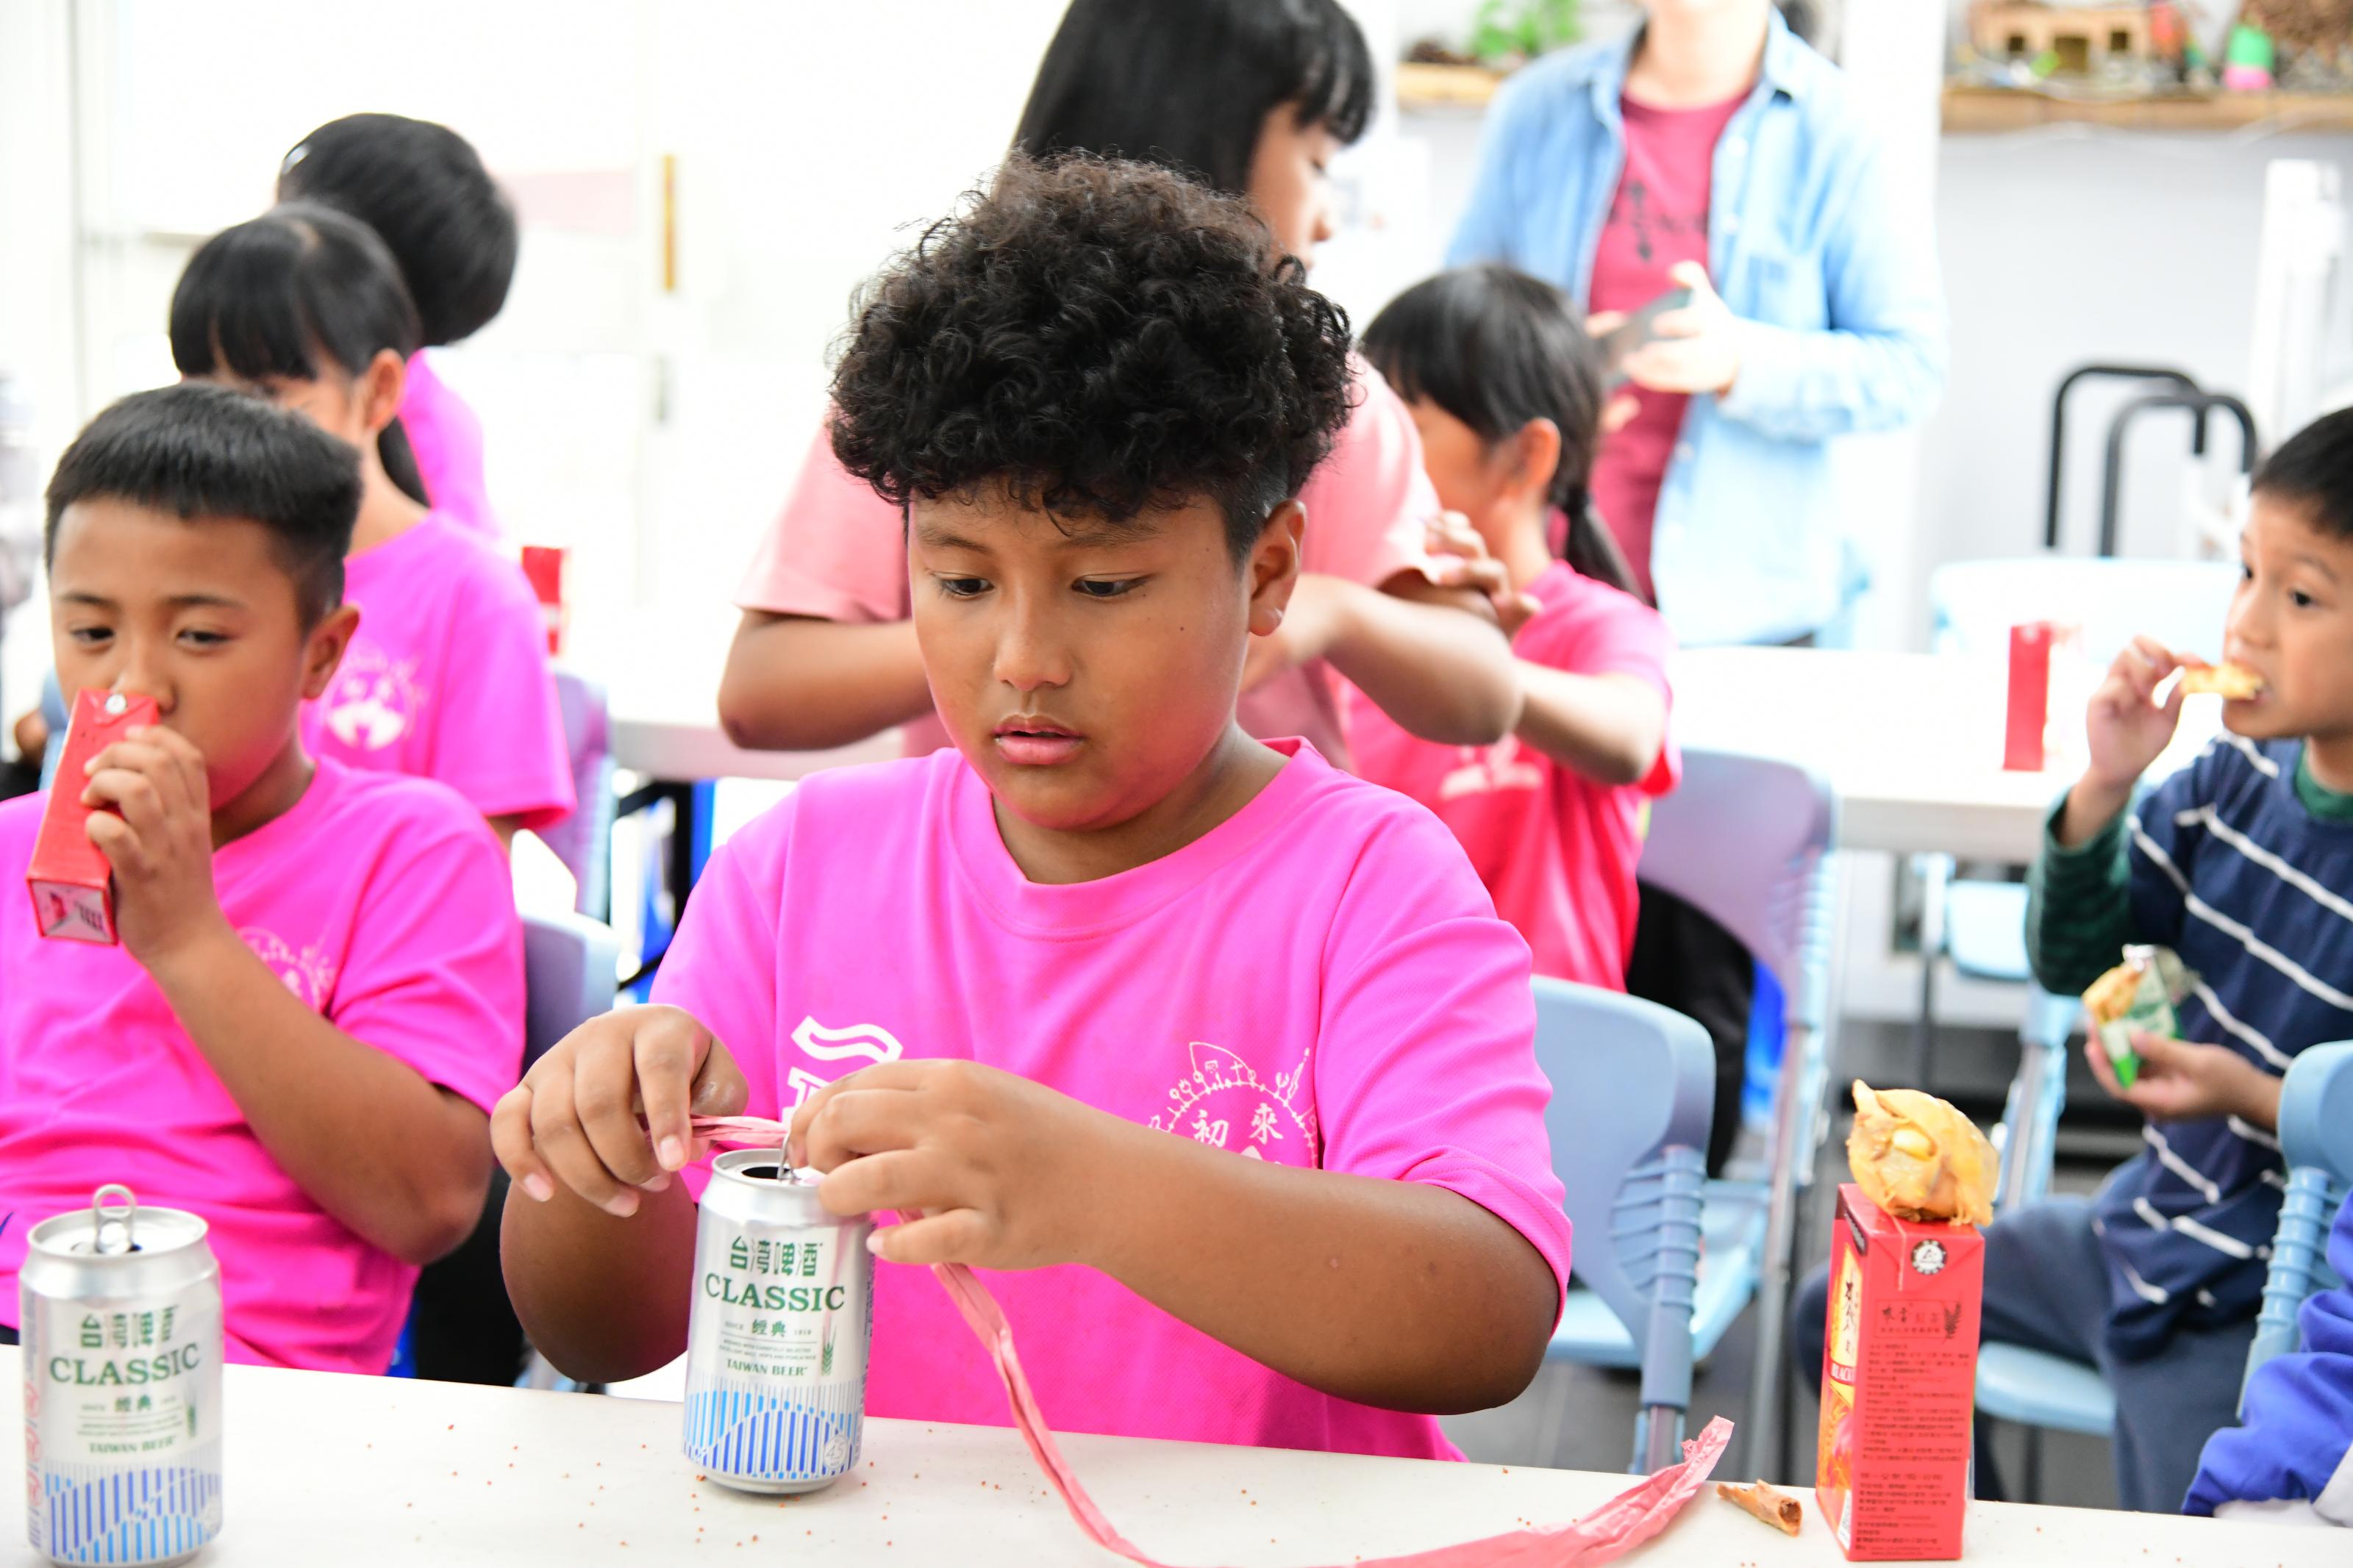 Students learn to make traditional bird-repelling devices with aluminum cans.